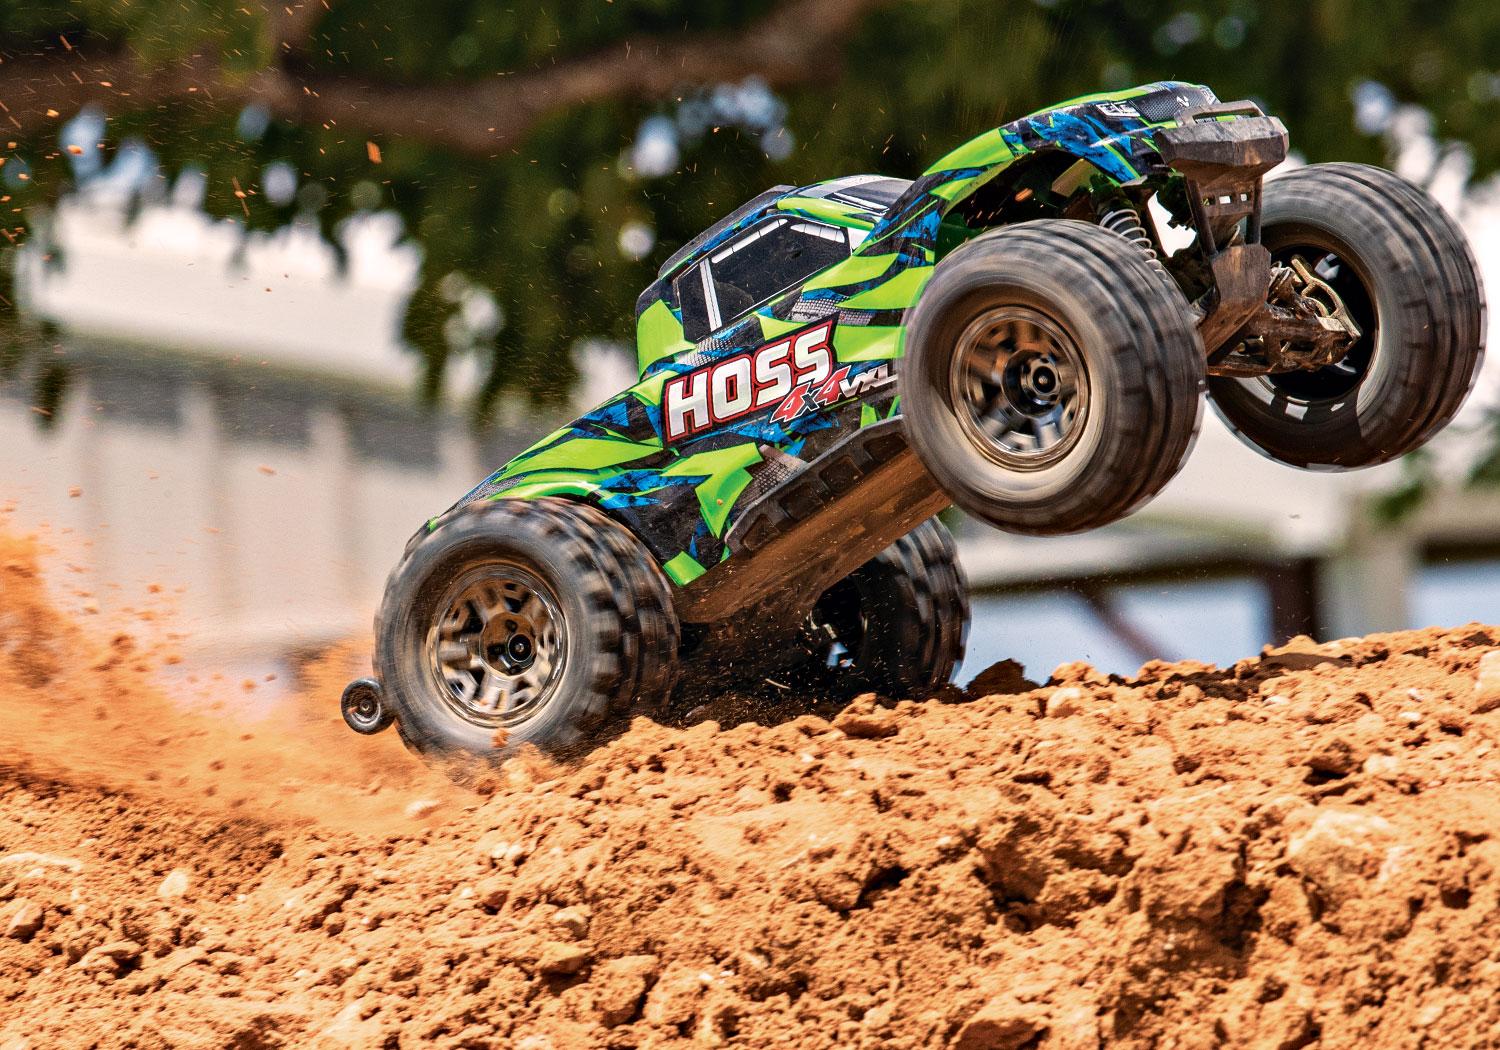 Rc Car Online Store: RC Car Types and Specialized Categories, Explained.